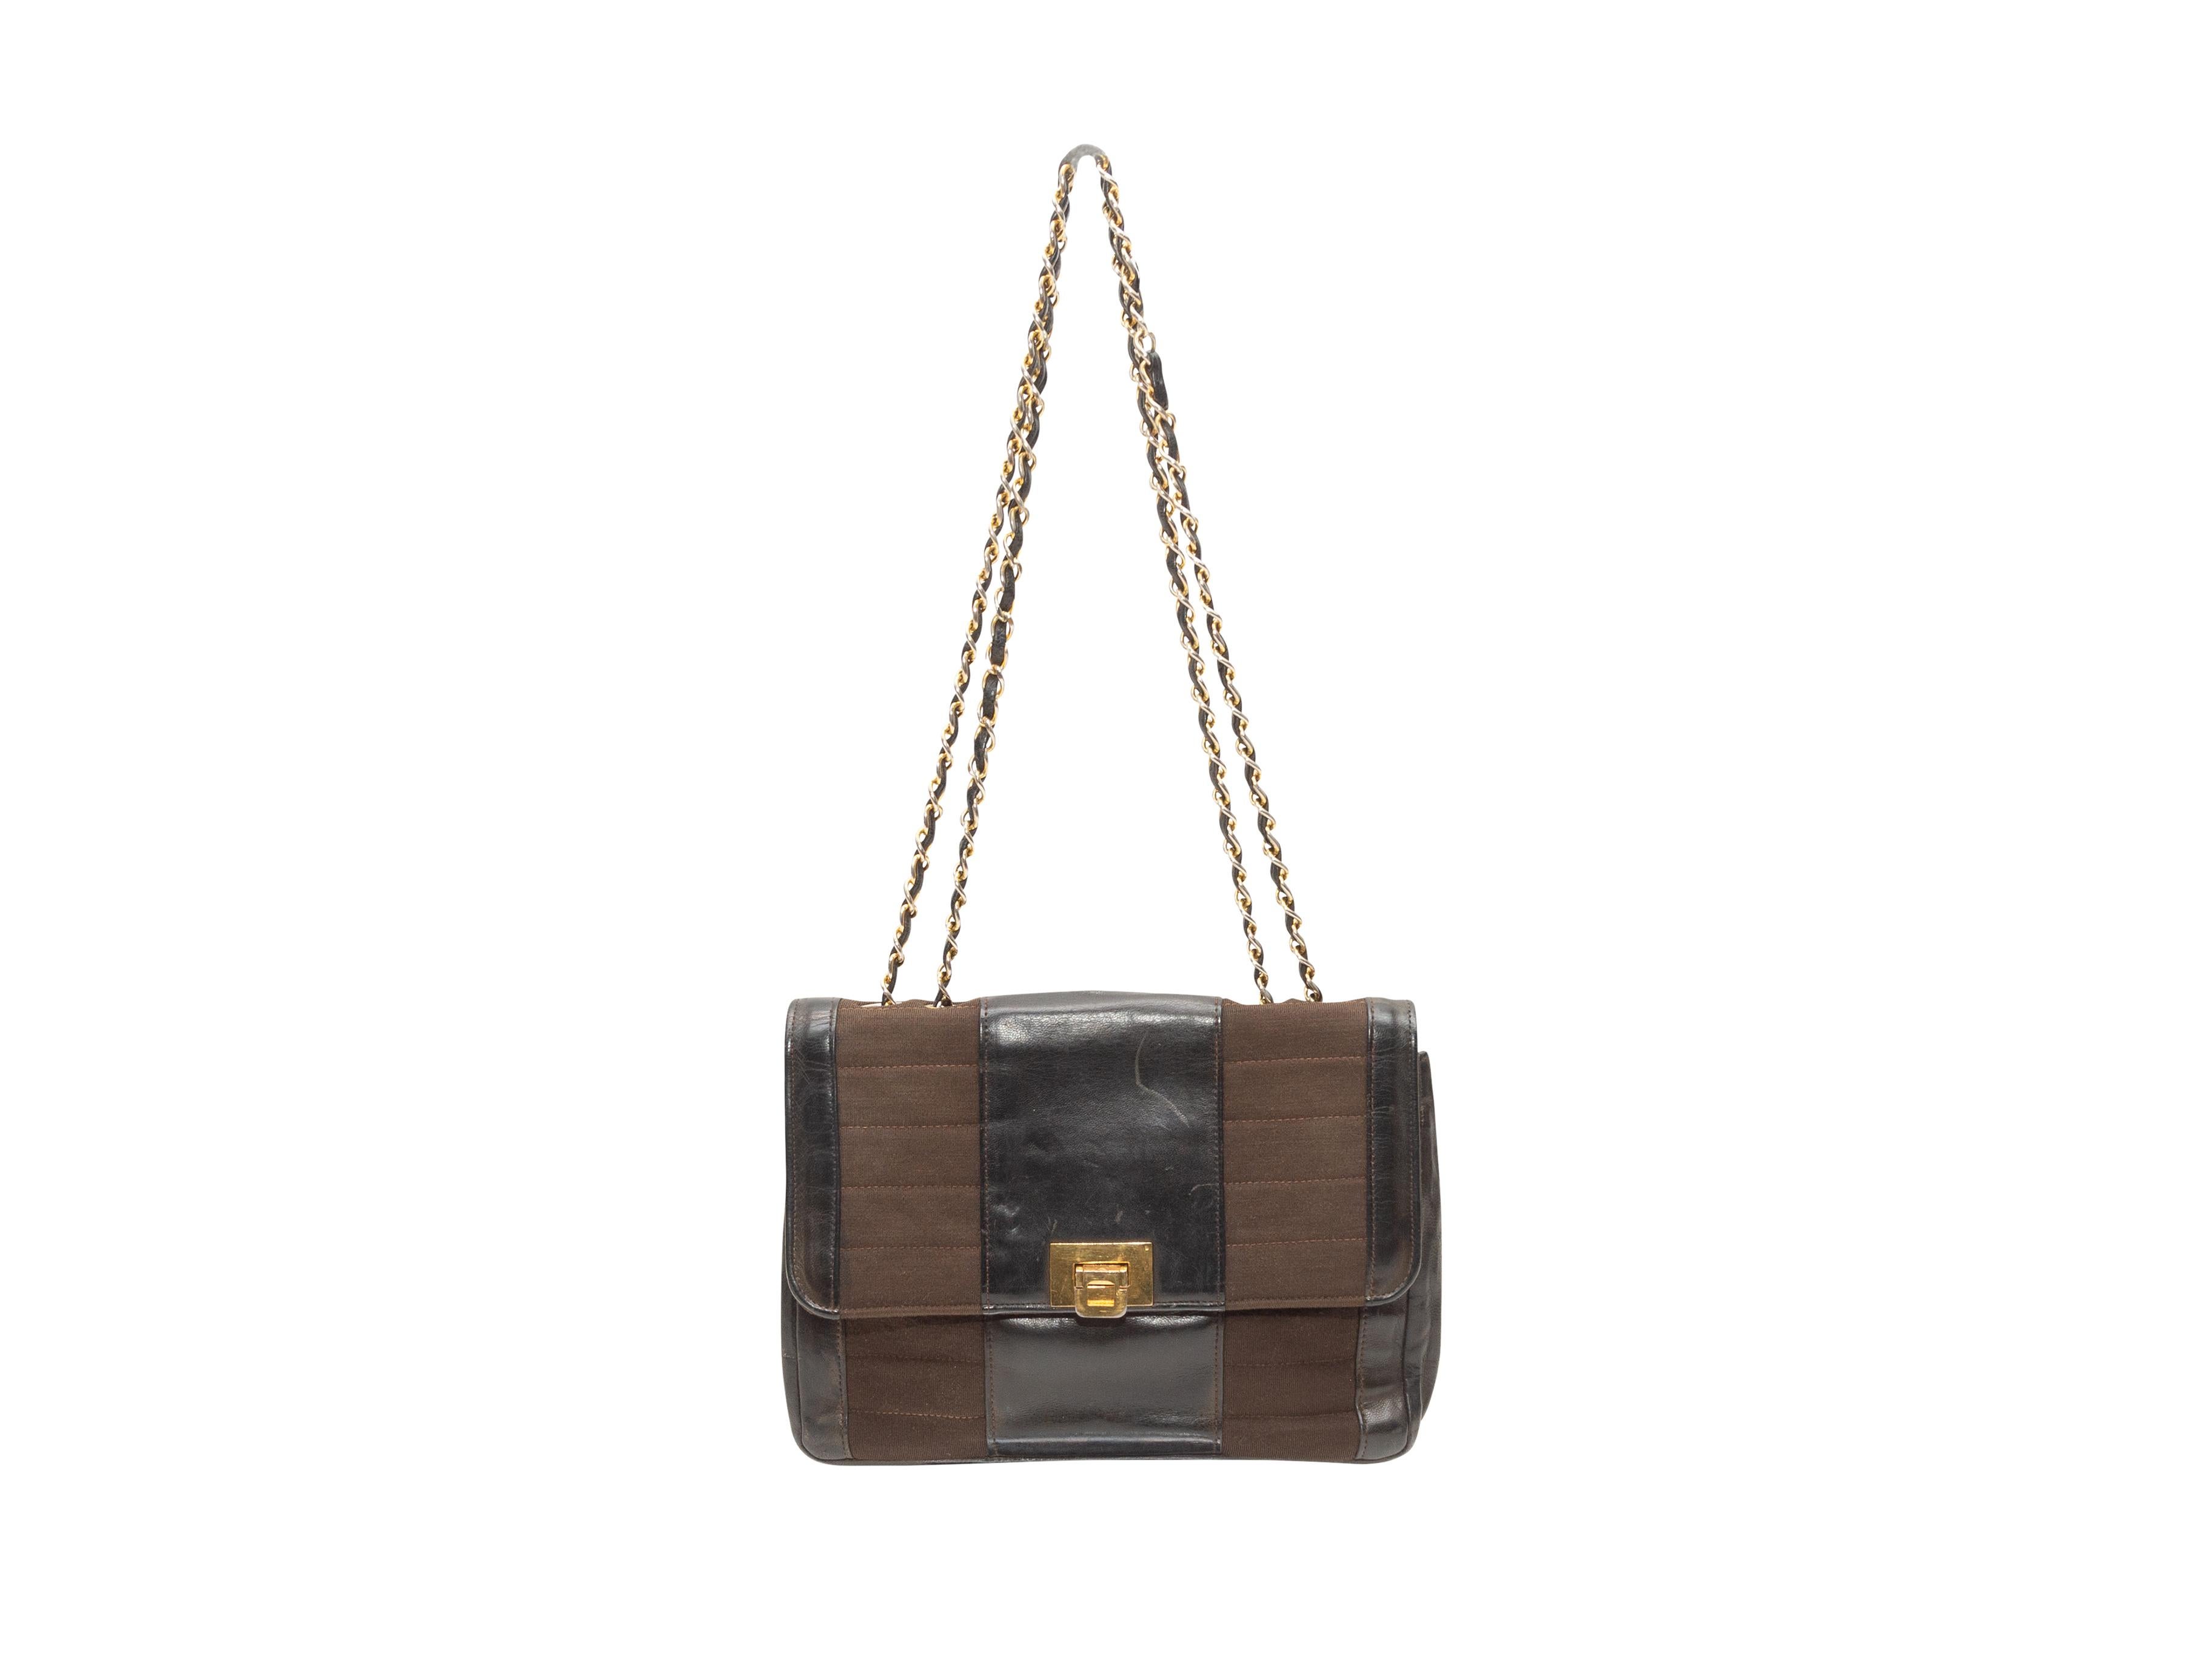 Product Details: Vintage Black & Brown Chanel 50s/60s Handbag. This handbag features a leather and brown textile body, gold-tone hardware, dual chain-link and leather shoulder straps, and a front clasp closure. 10